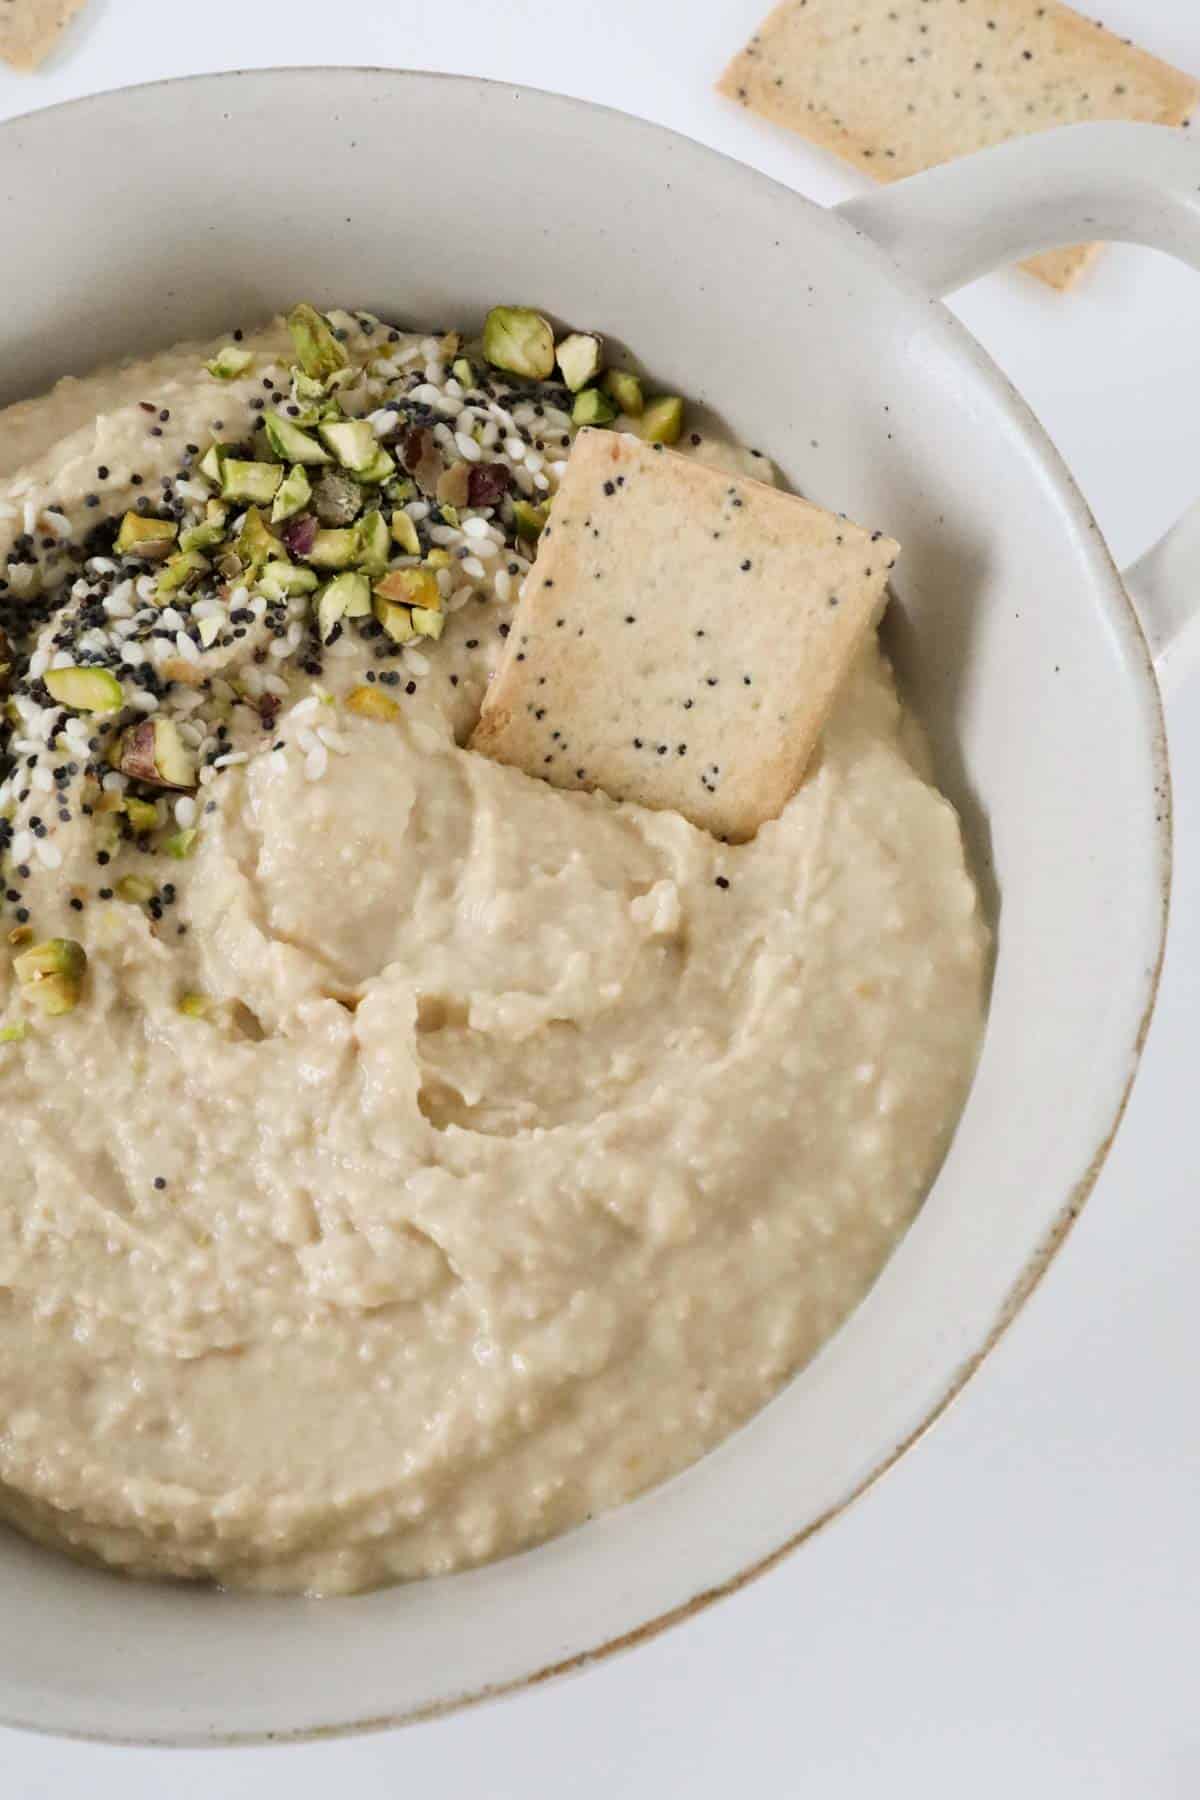 A lavosh cracker dipped in to a bowl of hummus.